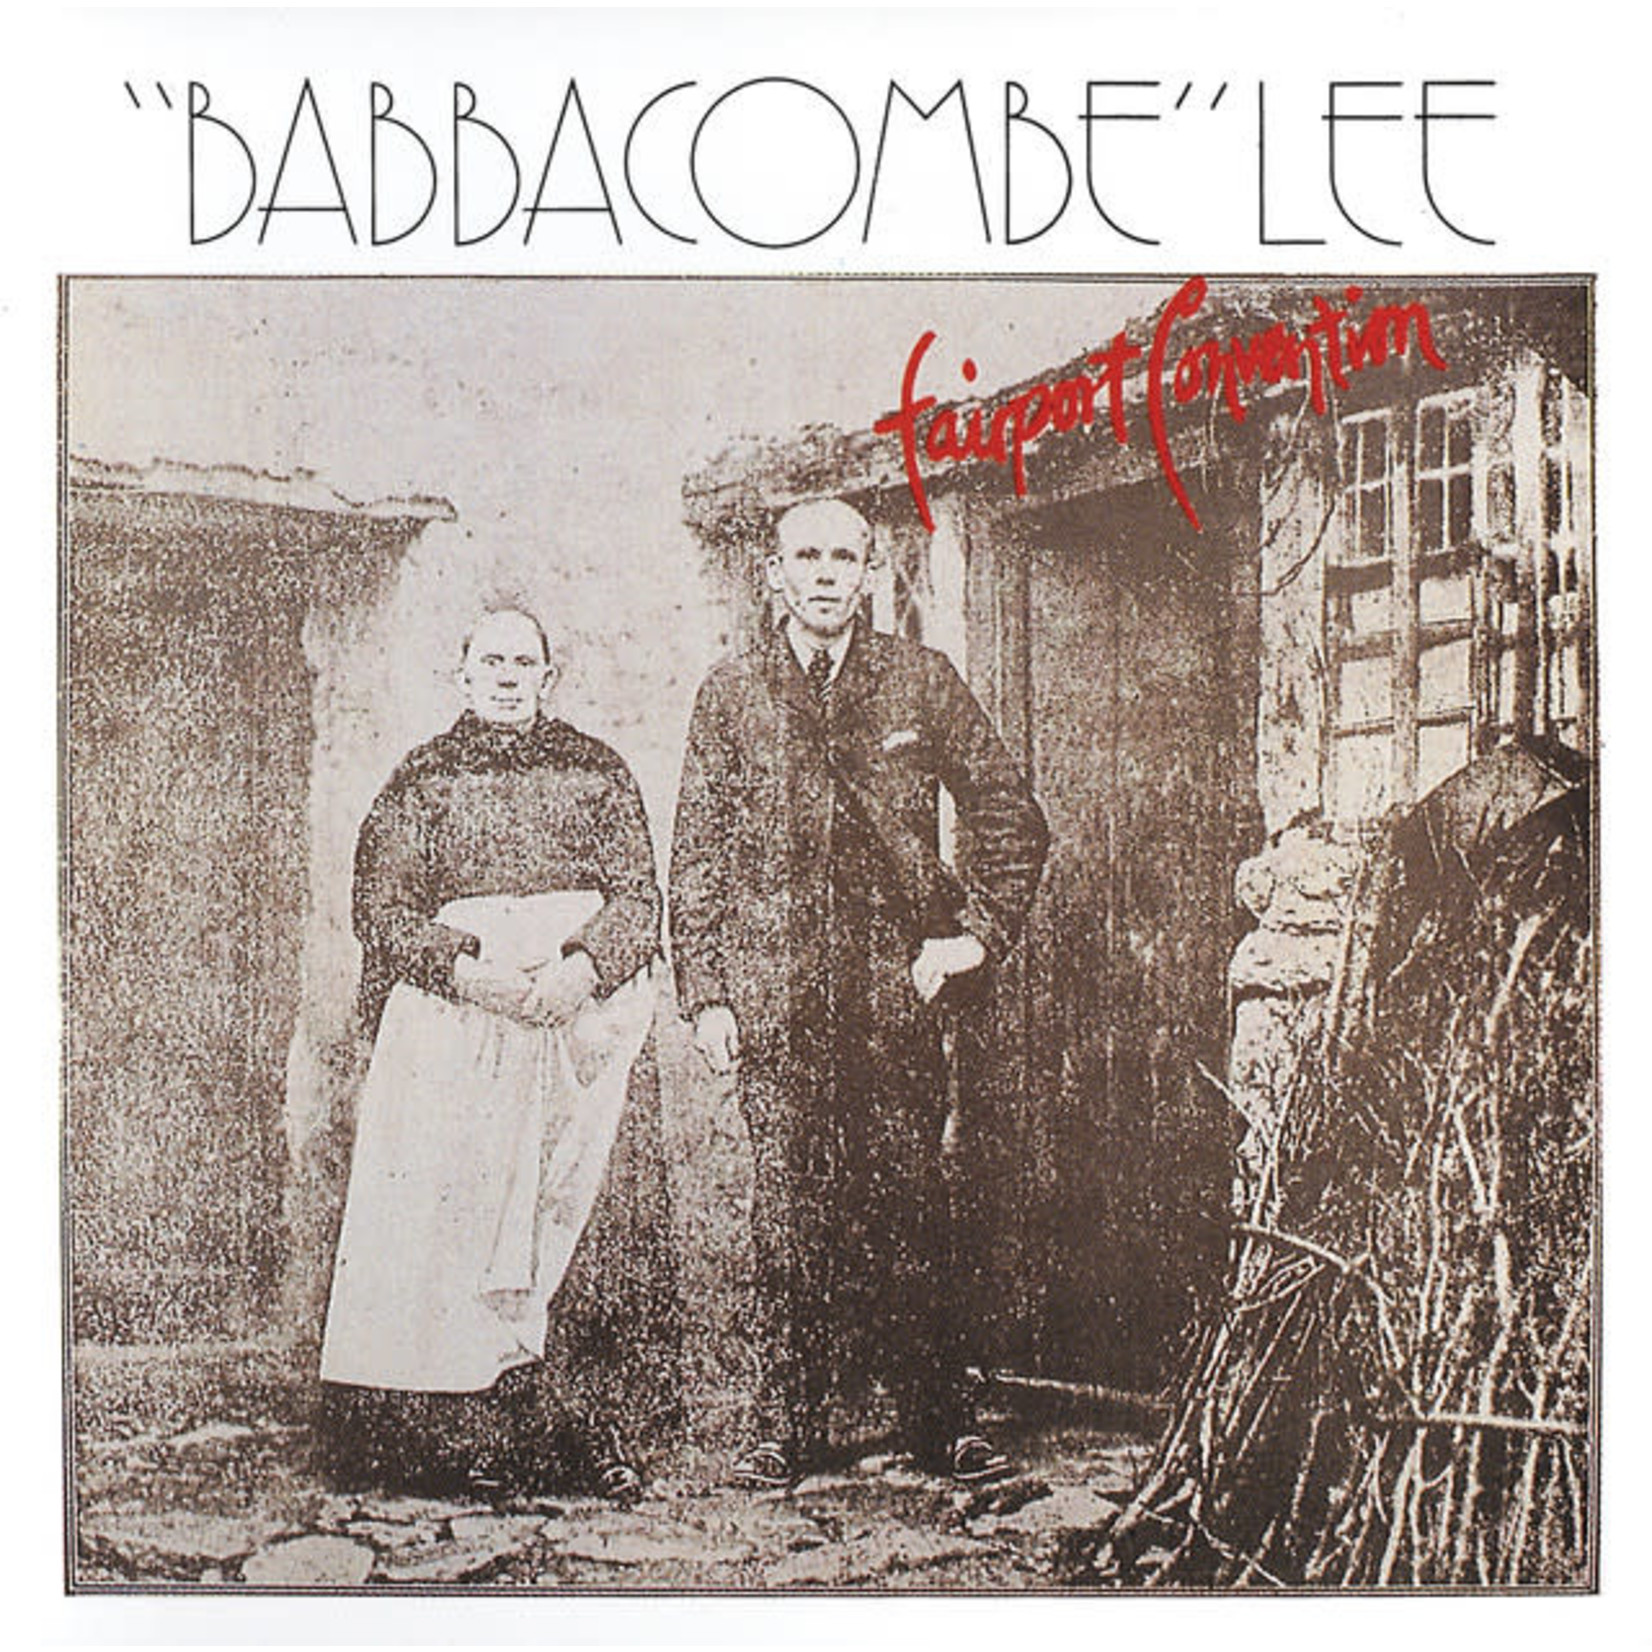 [Vintage] Fairport Convention - Babbacombe Lee